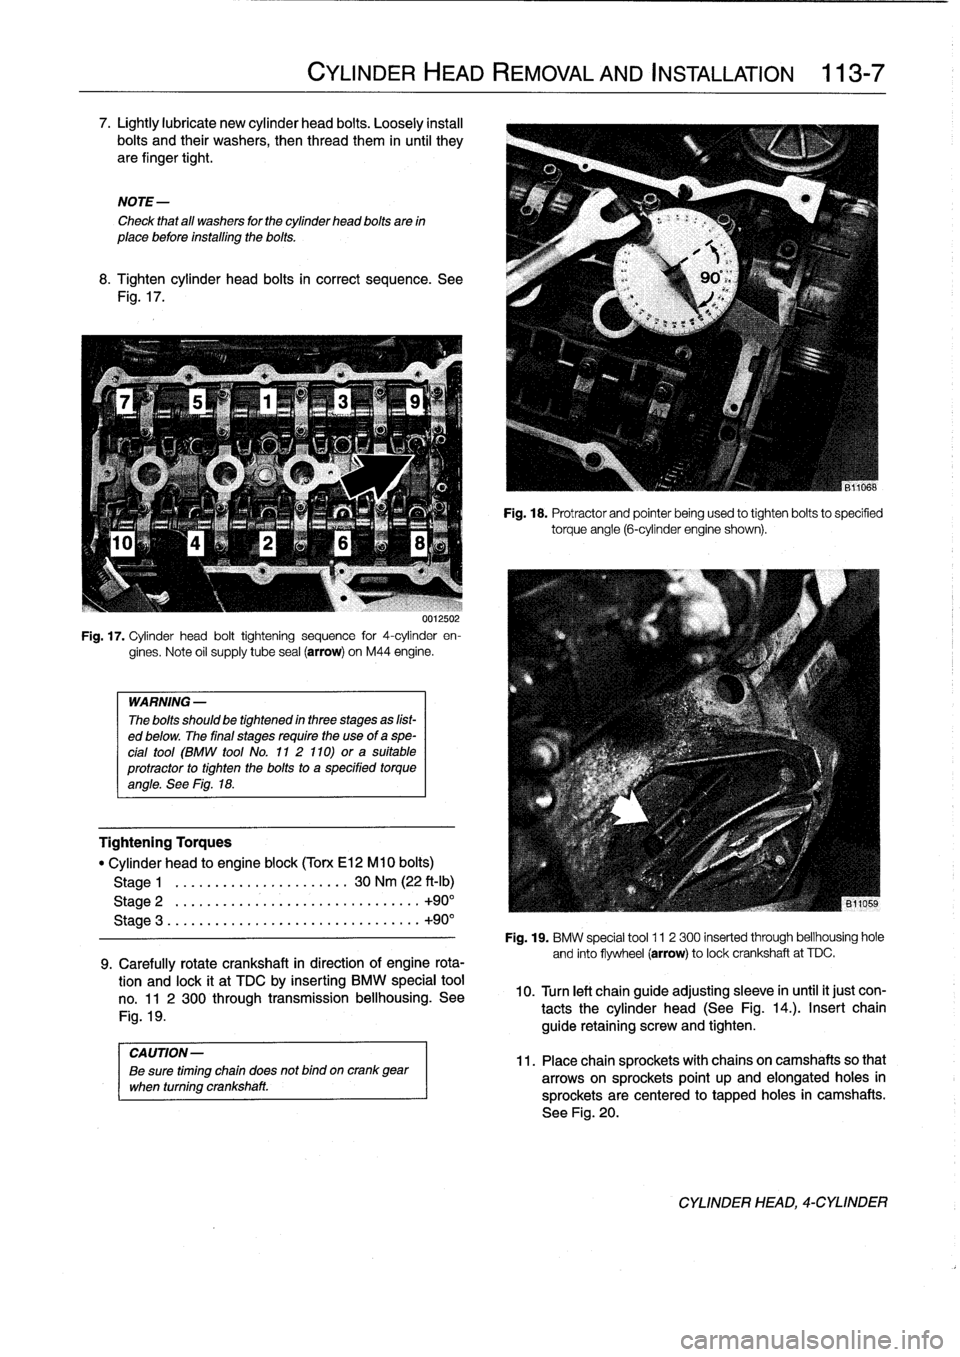 BMW 325i 1992 E36 Workshop Manual 
7
.
Lightly
lubricate
new
cylinder
head
bolts
.
Loosely
instan
bolts
and
their
washers,
then
thread
them
in
until
they
are
finger
tight
.

NOTE-

Check
that
all
washers
for
the
cylinder
head
bolts
ar